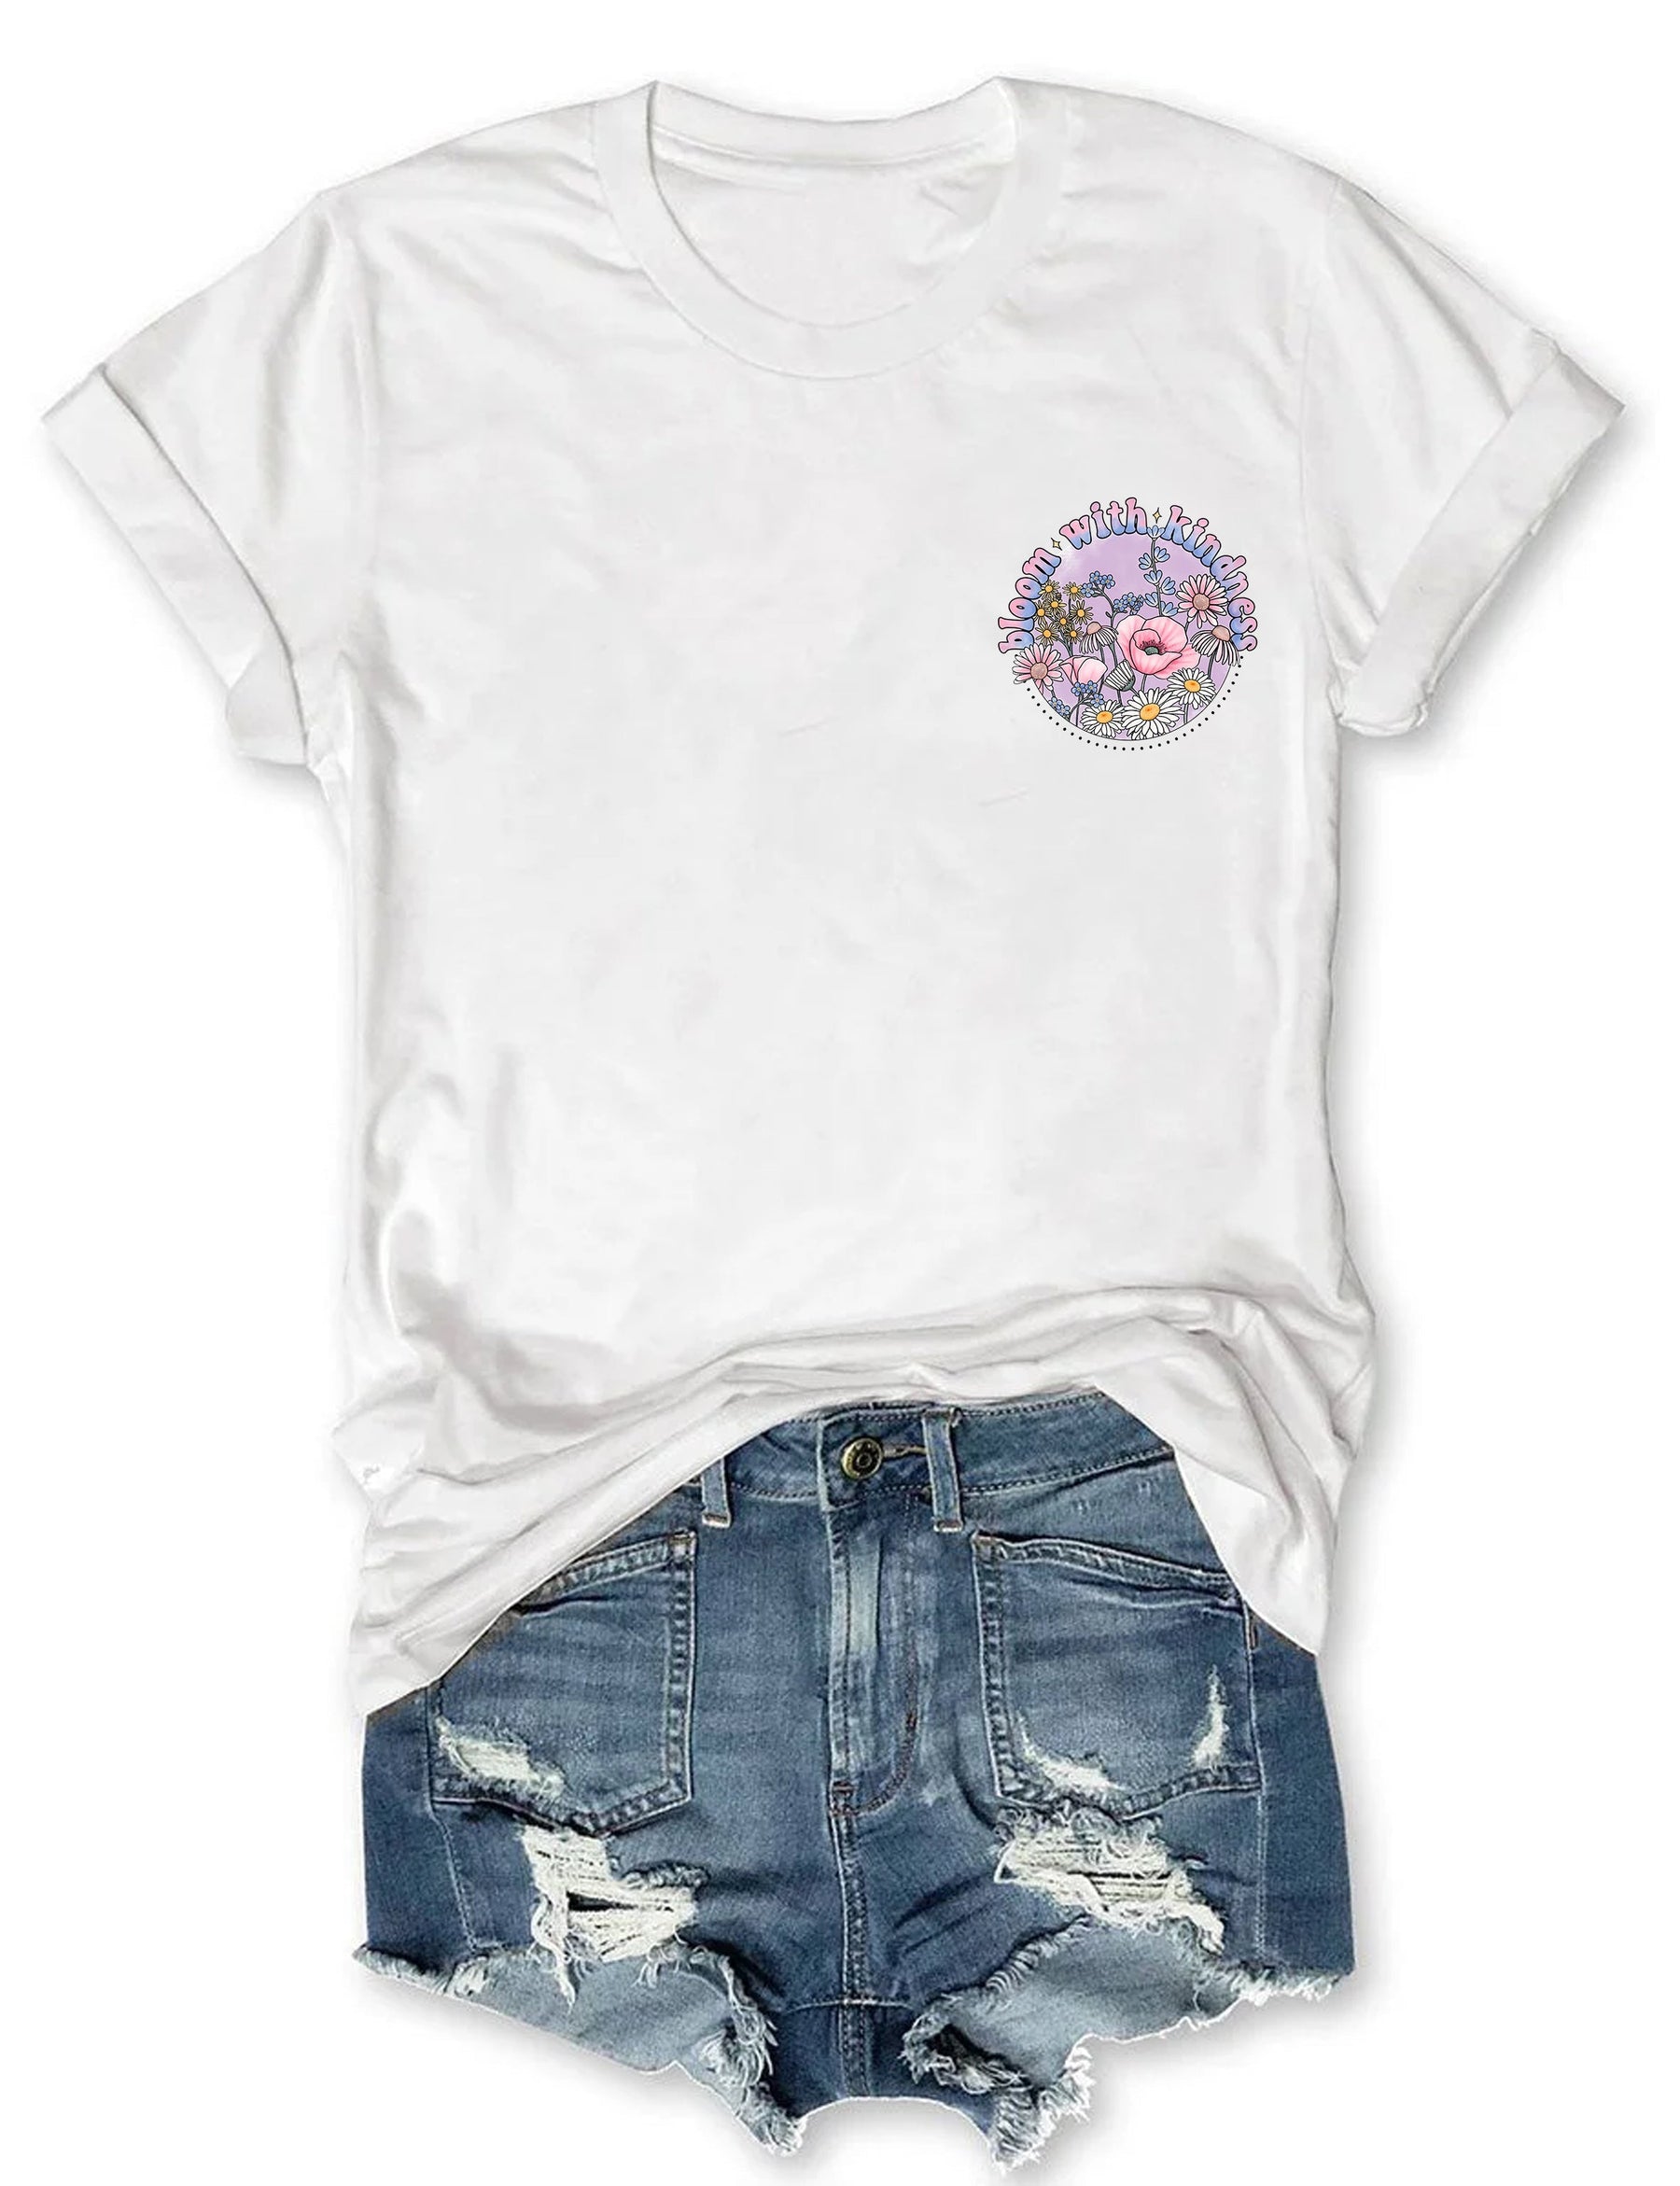 Bloom With Kindness T-shirt